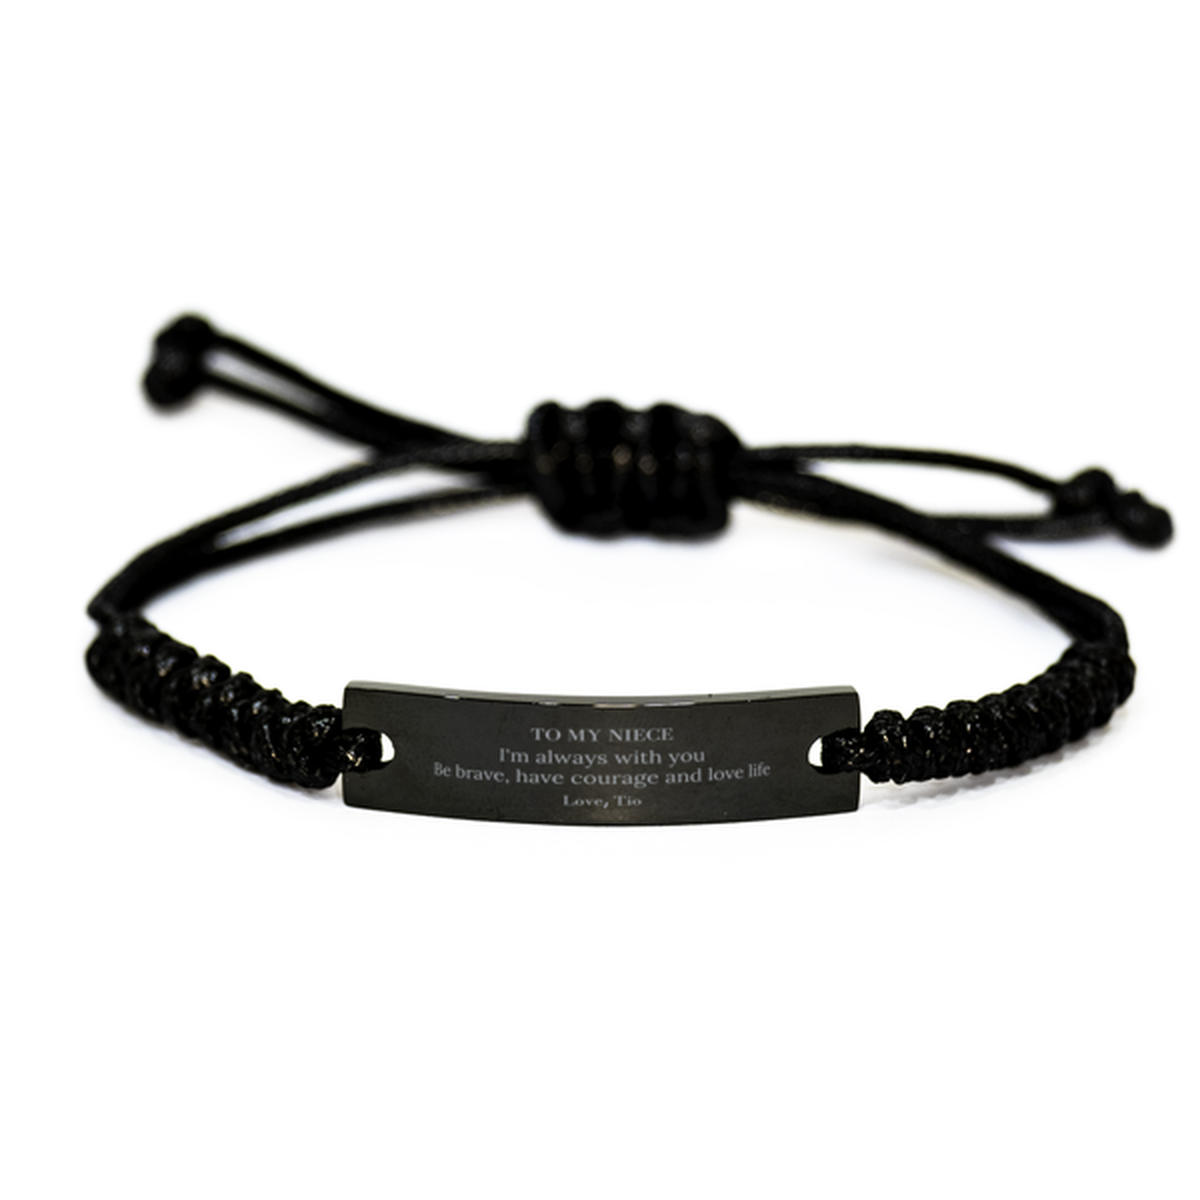 To My Niece Gifts from Tio, Unique Black Rope Bracelet Inspirational Christmas Birthday Graduation Gifts for Niece I'm always with you. Be brave, have courage and love life. Love, Tio